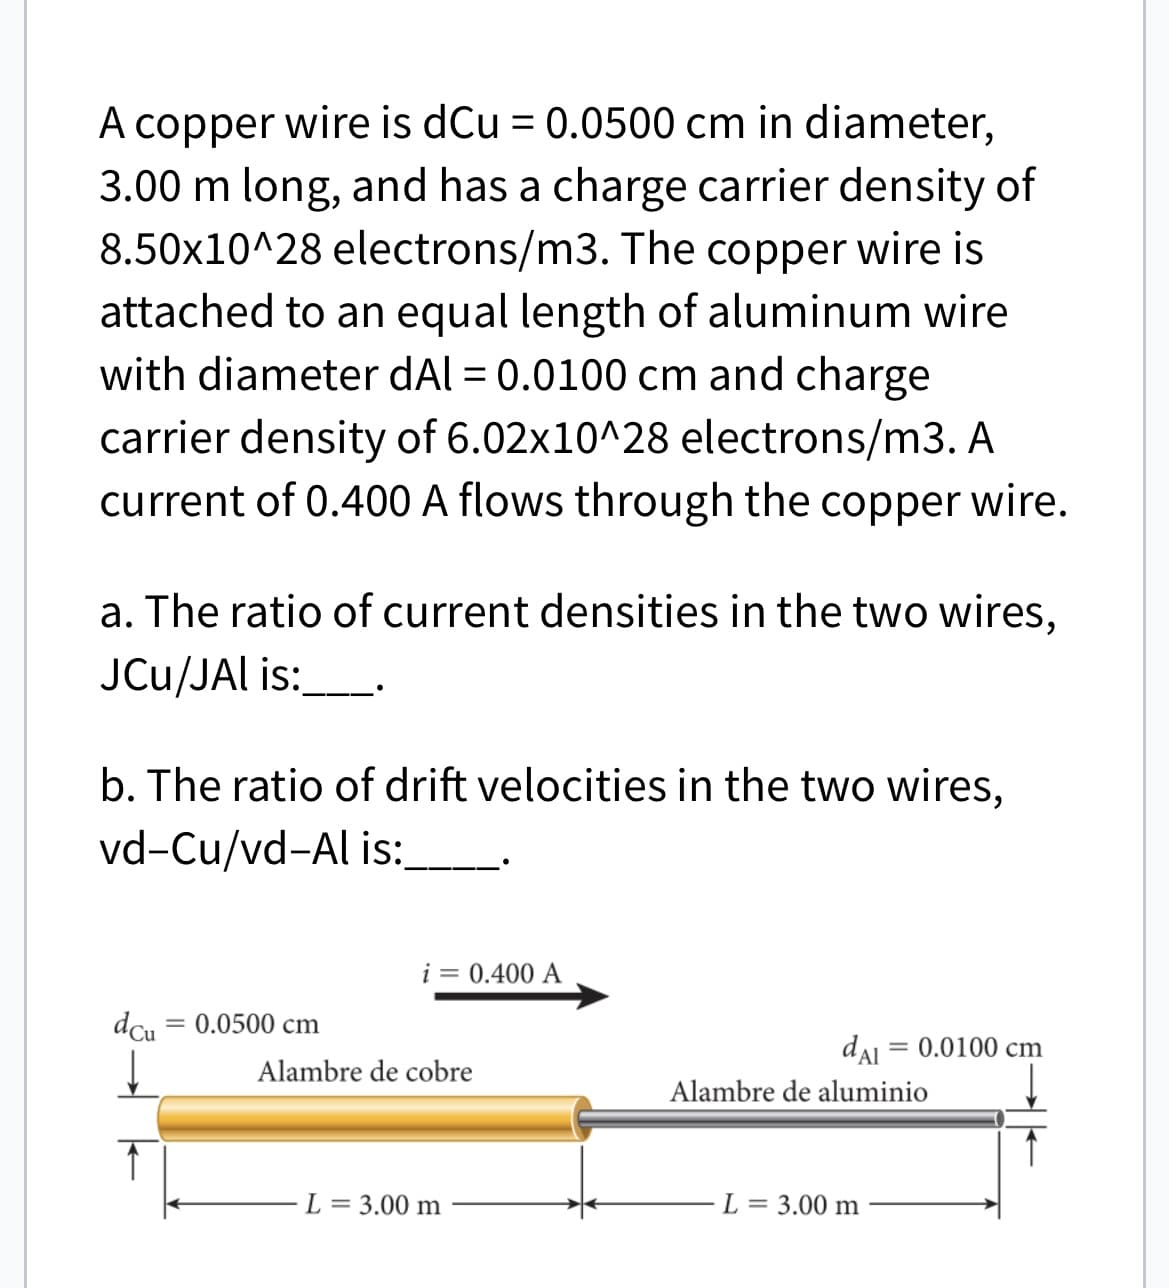 A copper wire is dCu = 0.0500 cm in diameter,
3.00 m long, and has a charge carrier density of
8.50x10^28 electrons/m3. The copper wire is
attached to an equal length of aluminum wire
with diameter dAl = 0.0100 cm and charge
carrier density of 6.02x10^28 electrons/m3. A
current of 0.400 A flows through the copper wire.
a. The ratio of current densities in the two wires,
JCu/JAl is:
b. The ratio of drift velocities in the two wires,
vd-Cu/vd-Al is:
dcu = 0.0500 cm
i = 0.400 A
Alambre de cobre
L = 3.00 m
dal = 0.0100 cm
Alambre de aluminio
L = 3.00 m